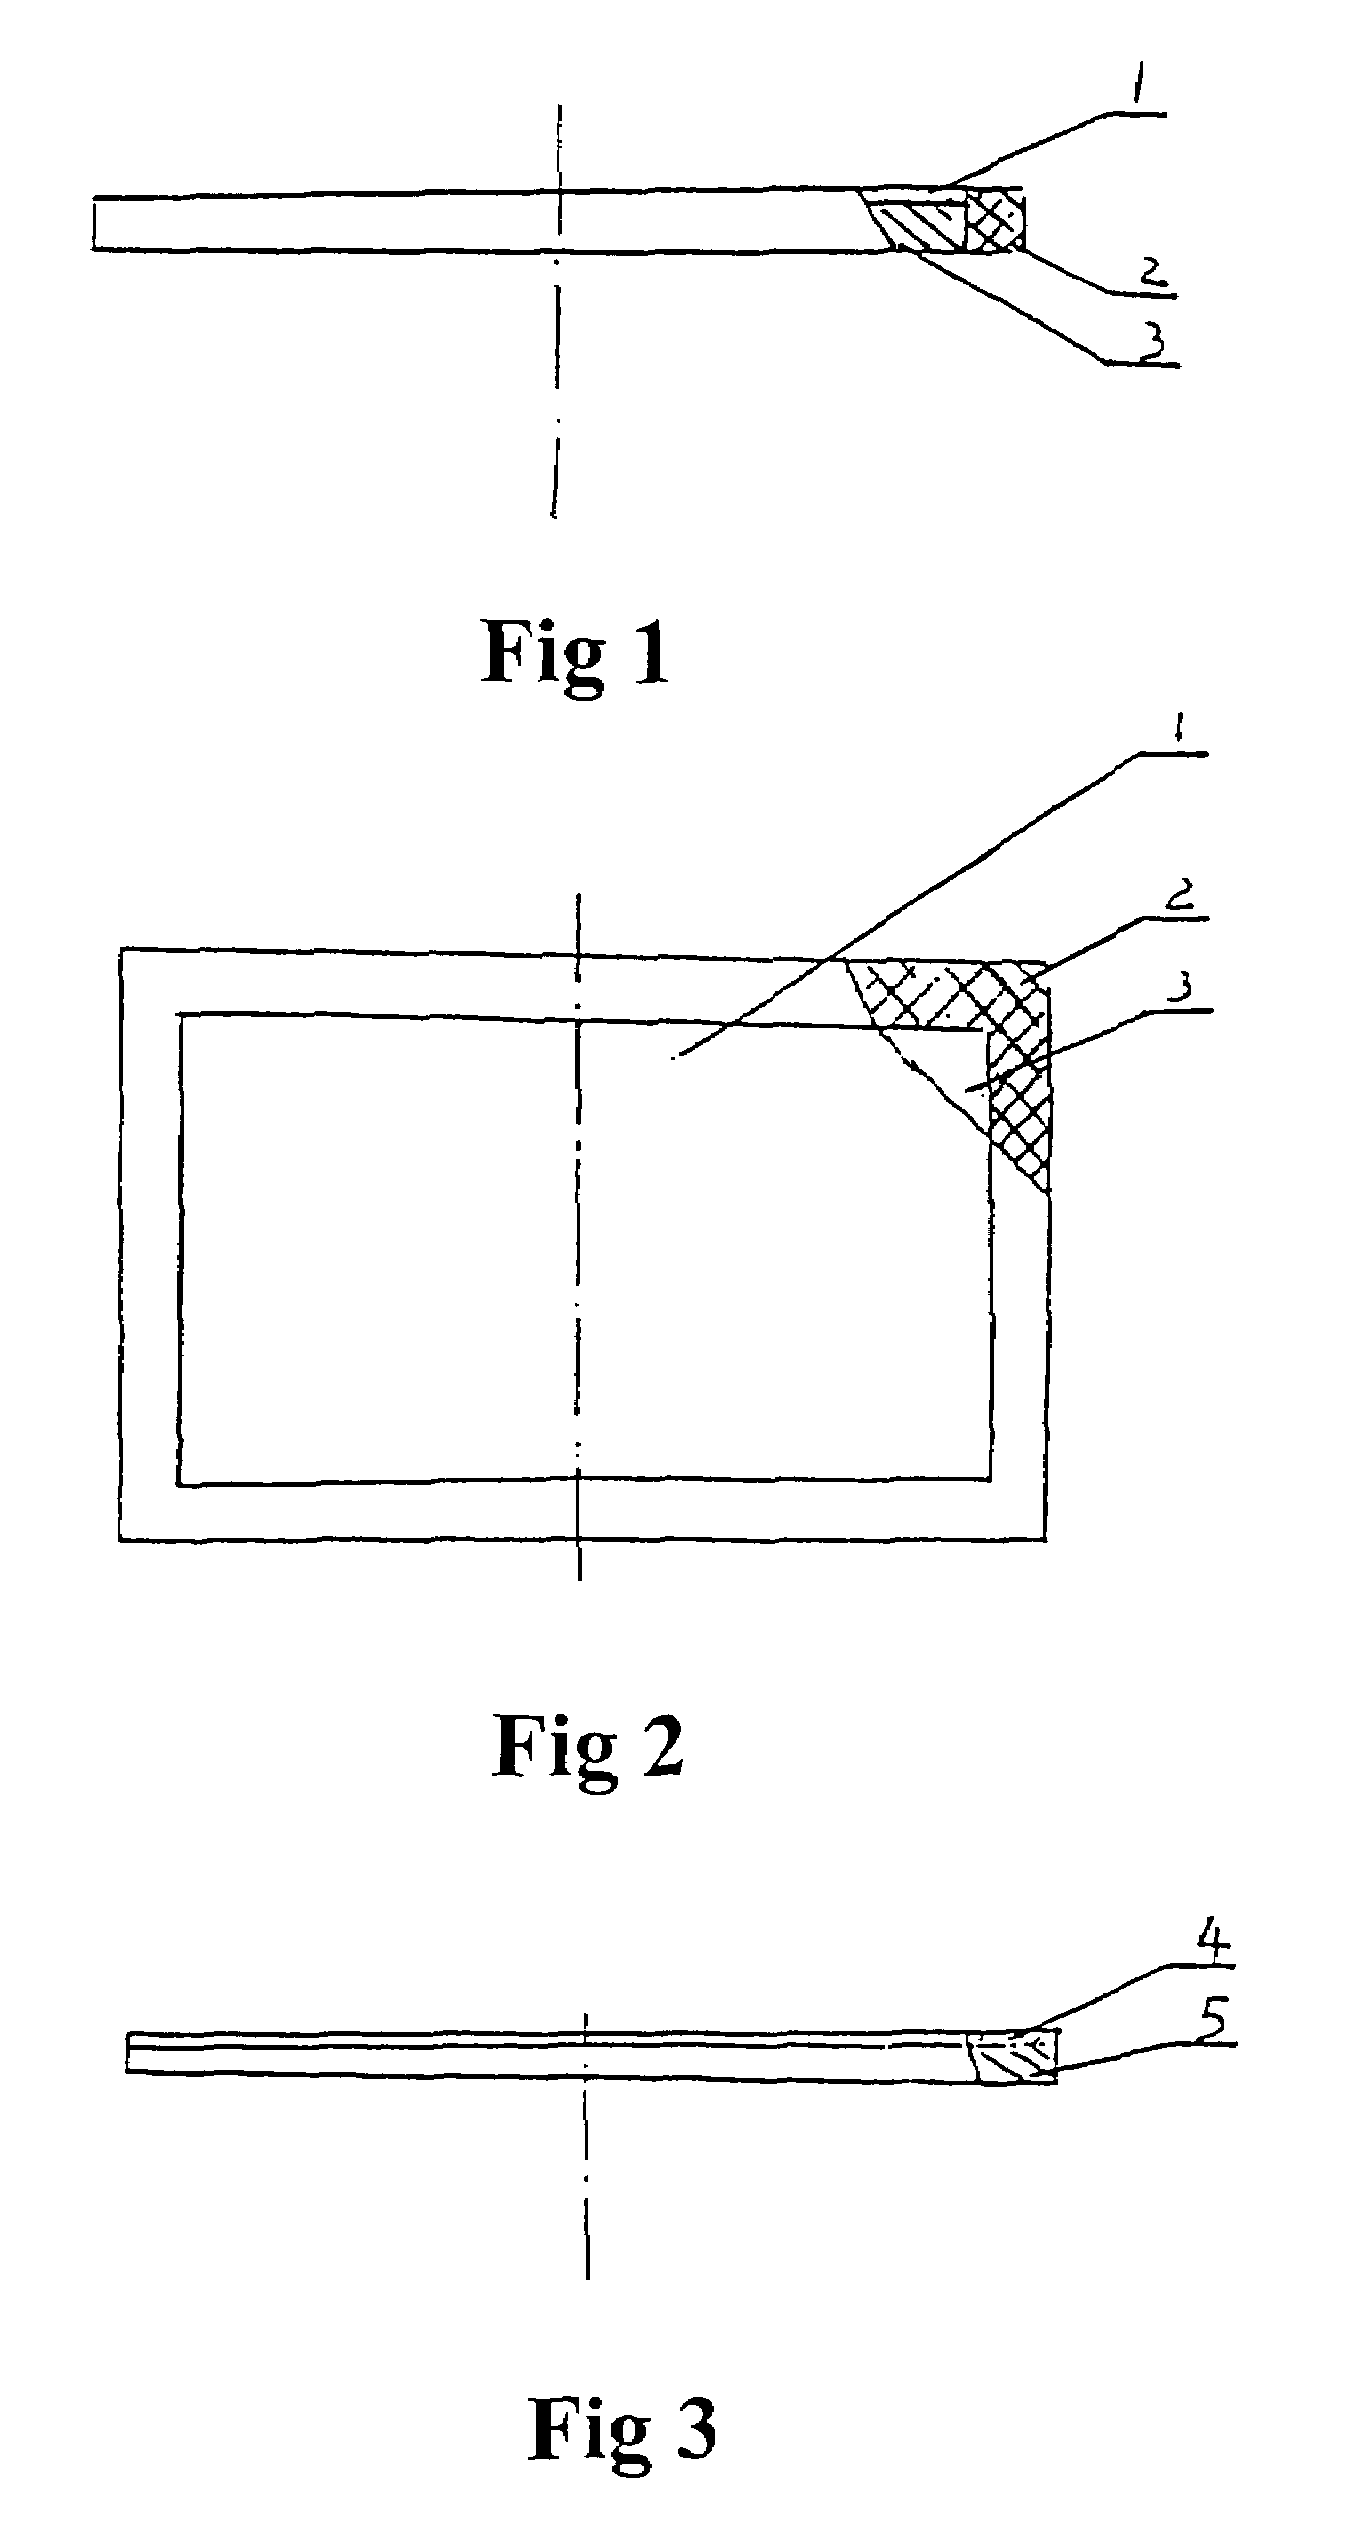 Permeable membrane diaphragm of different layers for electroytic cells